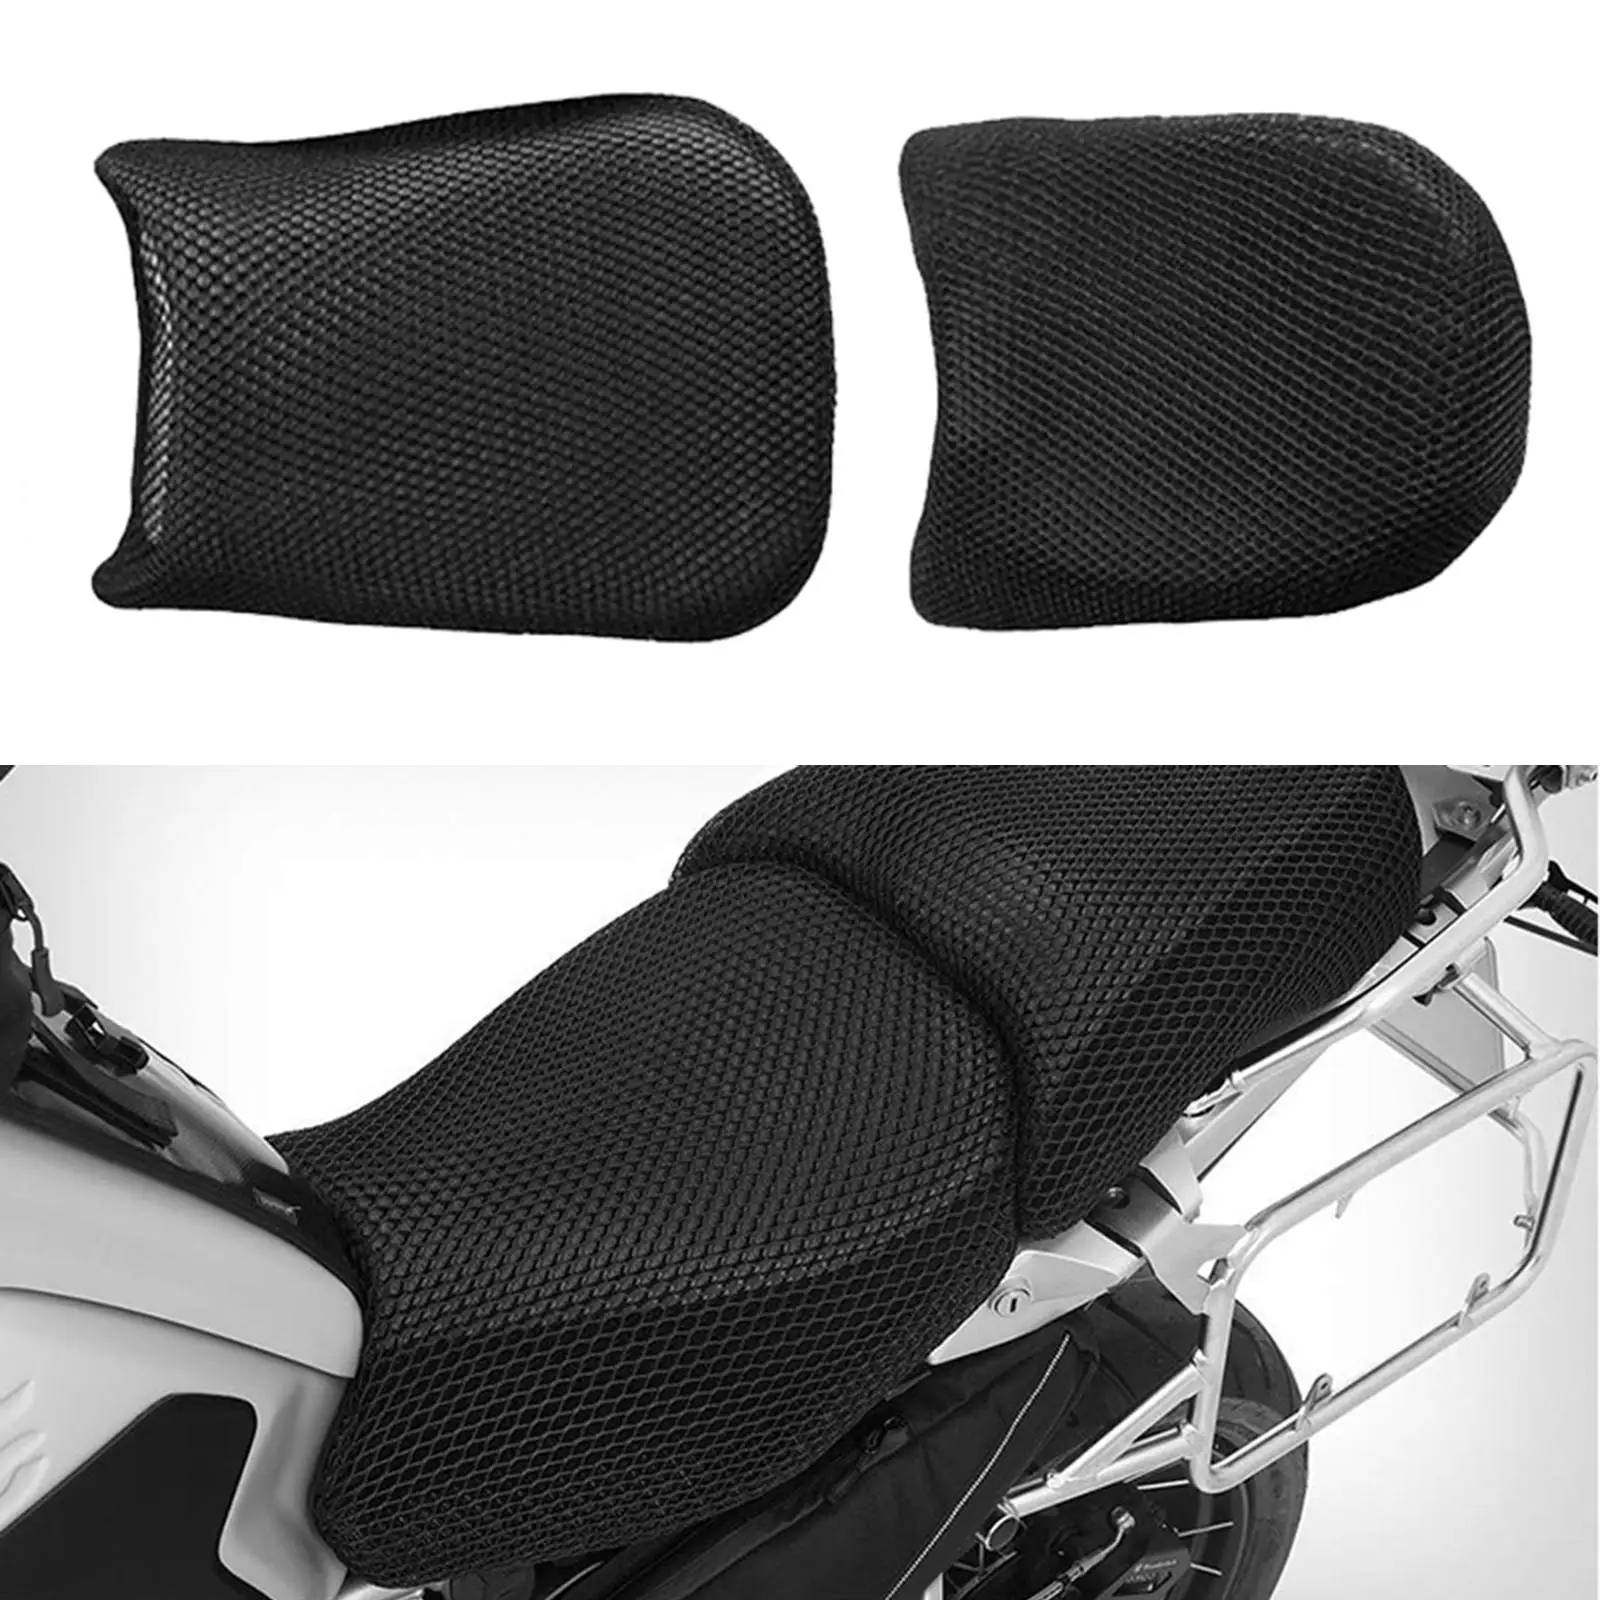 Black Motorcycle Seat Cover Saddle Seat Cover Seat Cover for R1200GS